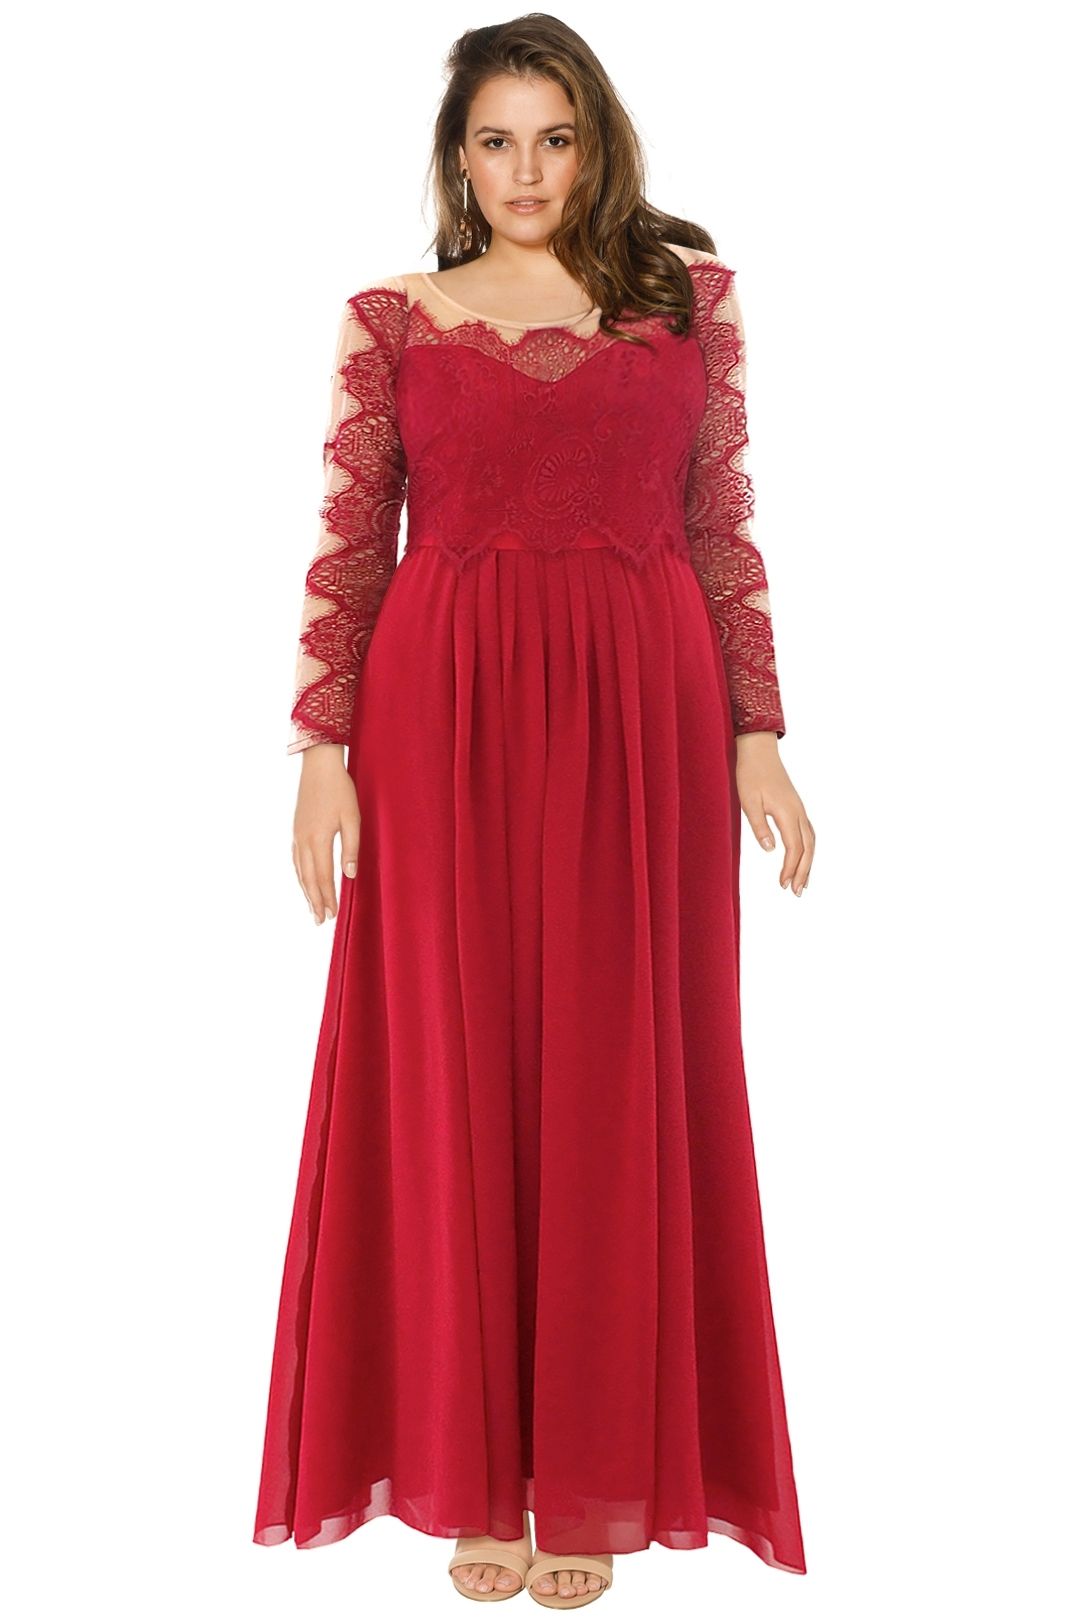 The Dress Shoppe - Gone With The Edge Gown - Red - Front 